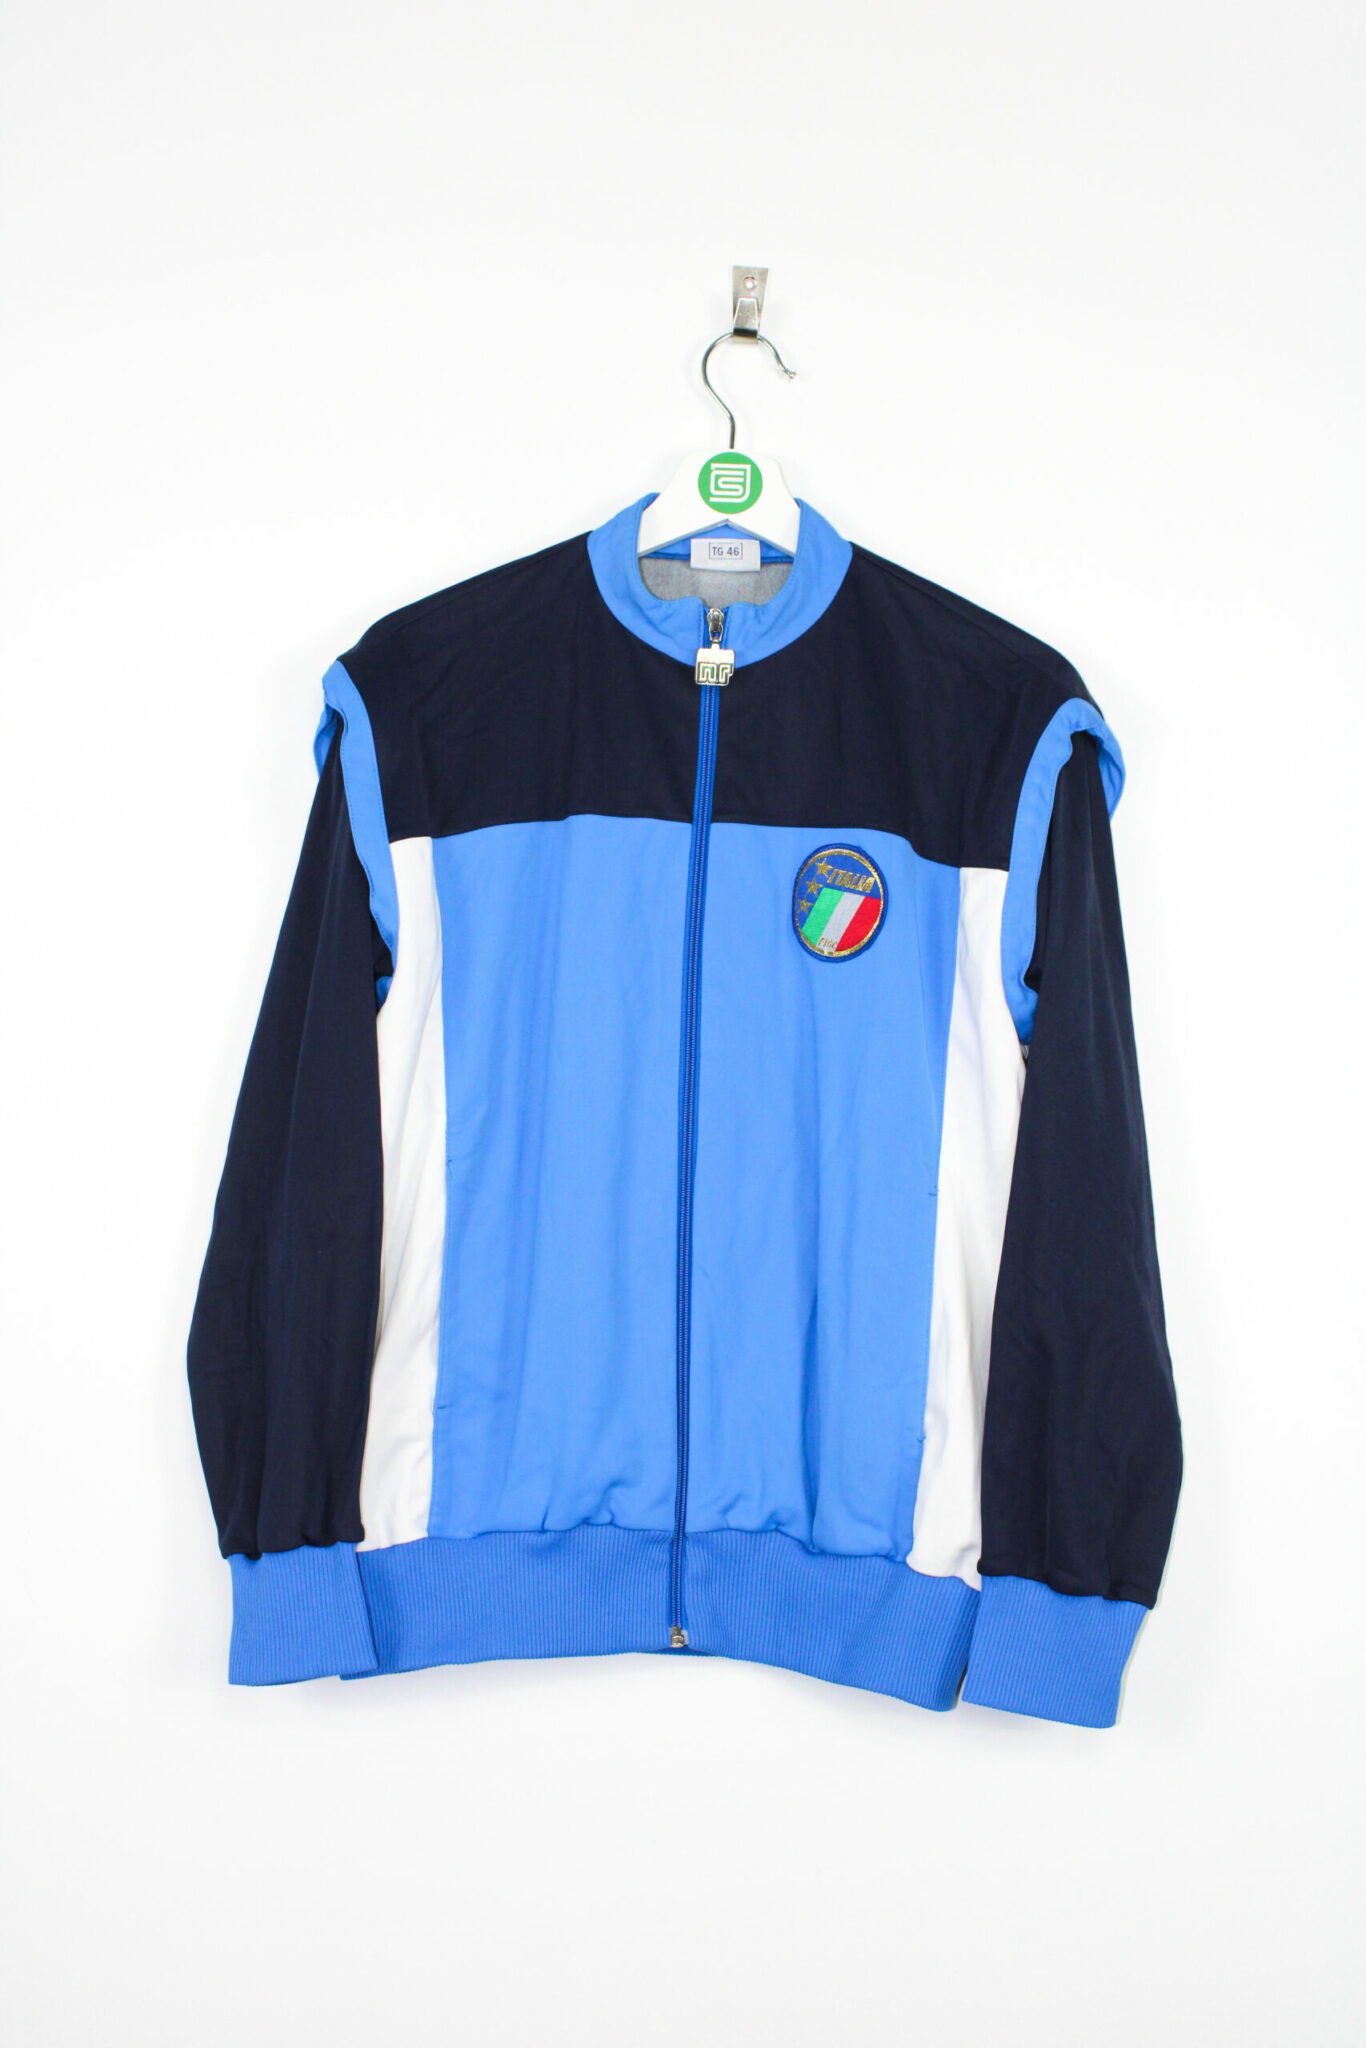 Italy 1985 track jacket - S/M • RB - Classic Soccer Jerseys